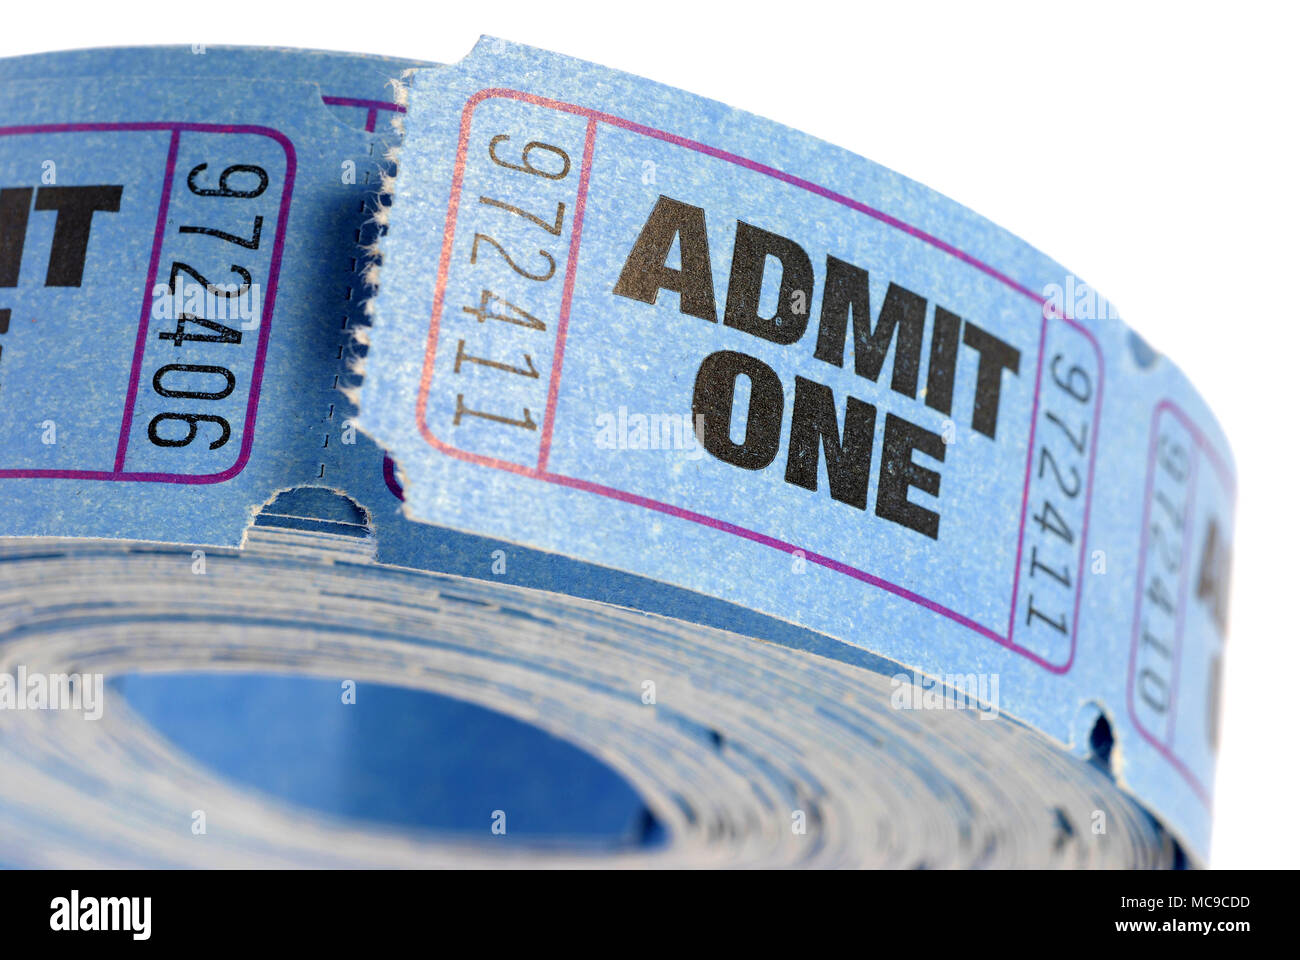 Roll of blue admit one tickets isolated on white background Stock Photo